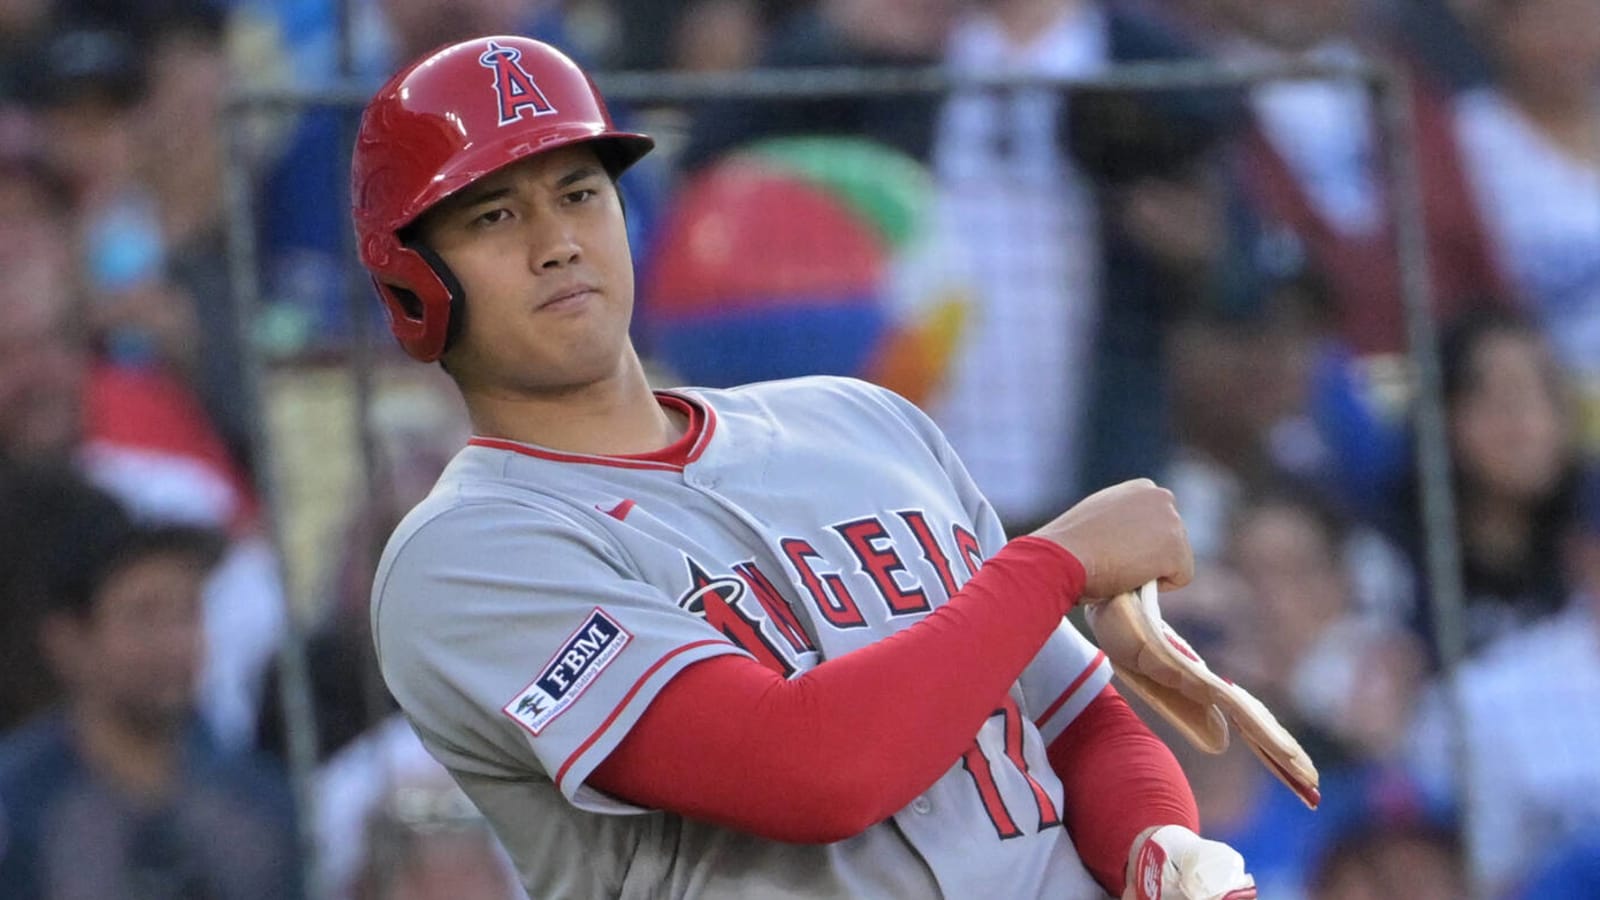 Angels teammate reveals Shohei Ohtani's unexpected talent